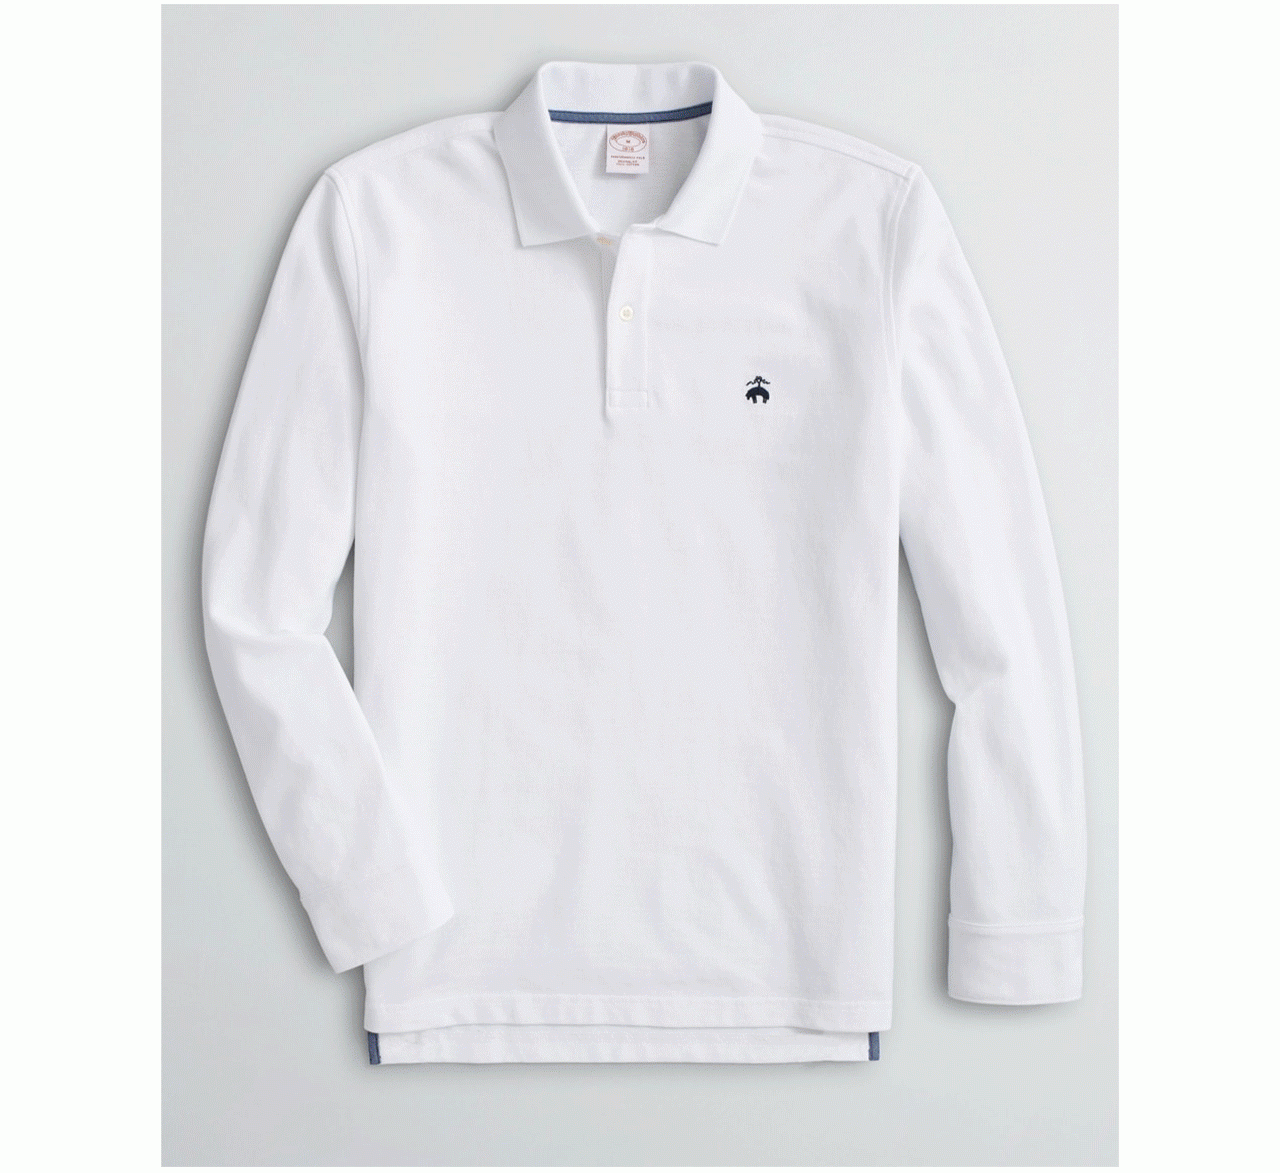 At Long Last A fresh take on our popular polos in a season-right style: Our new button-cuff long-sleeve version is here.